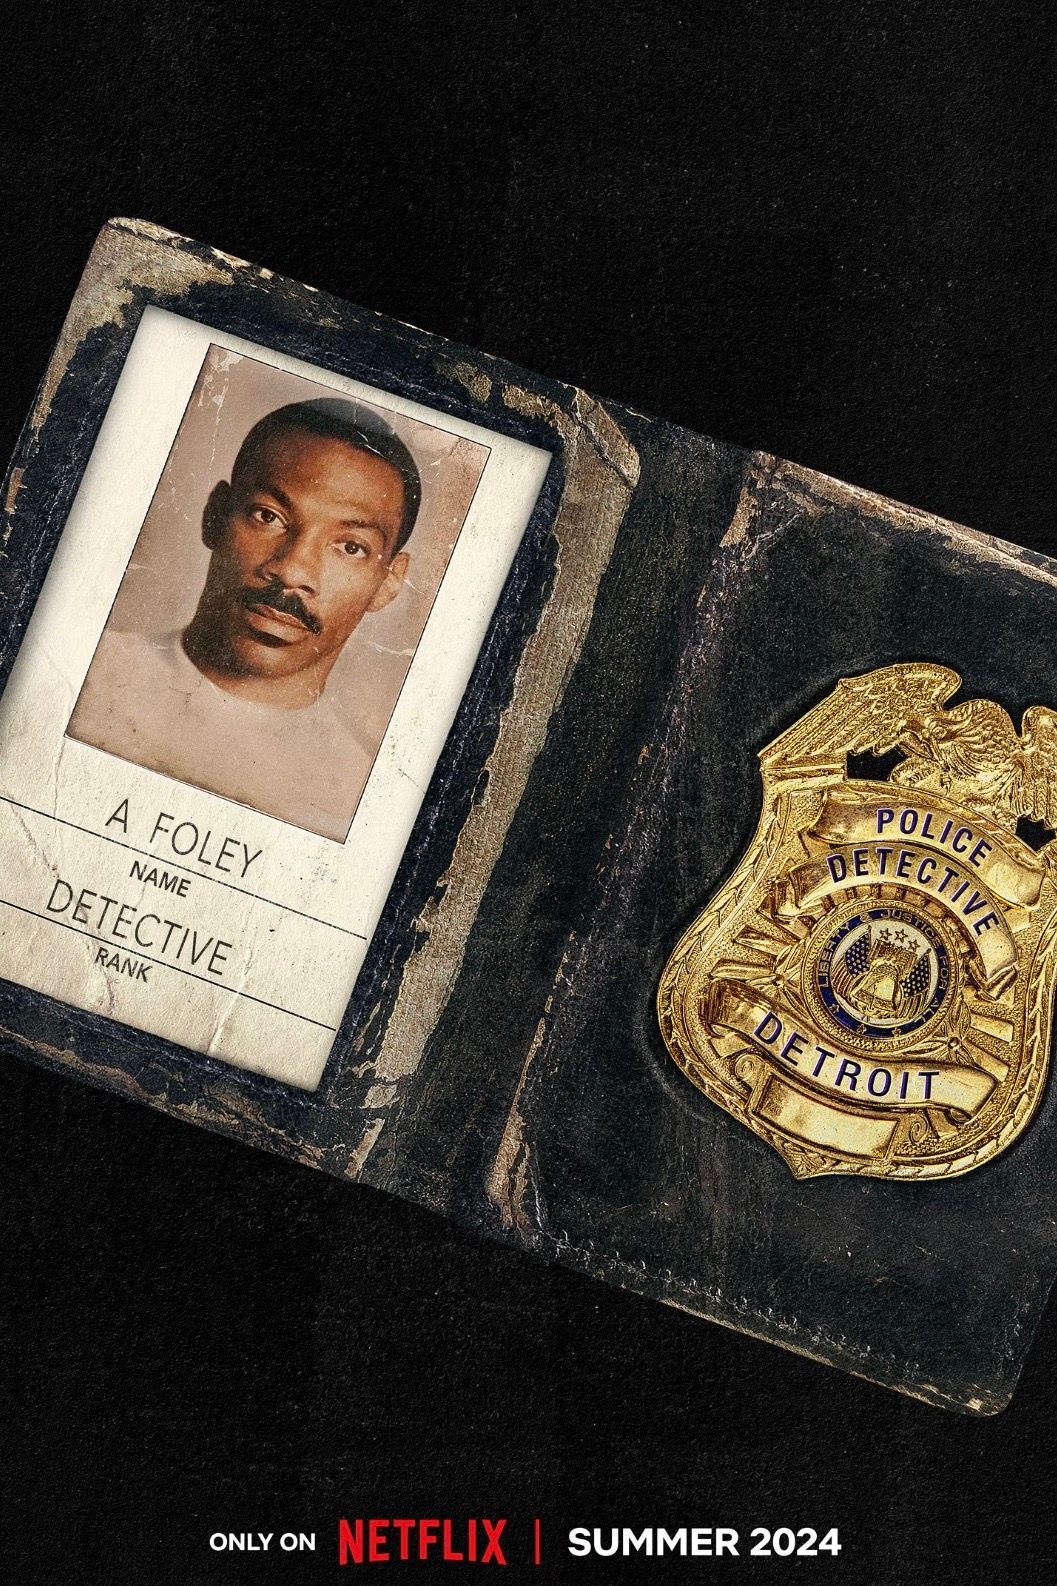 Beverly Hills Cop Axel Foley Movie Poster featuring Eddie Murphy on a Police Badge